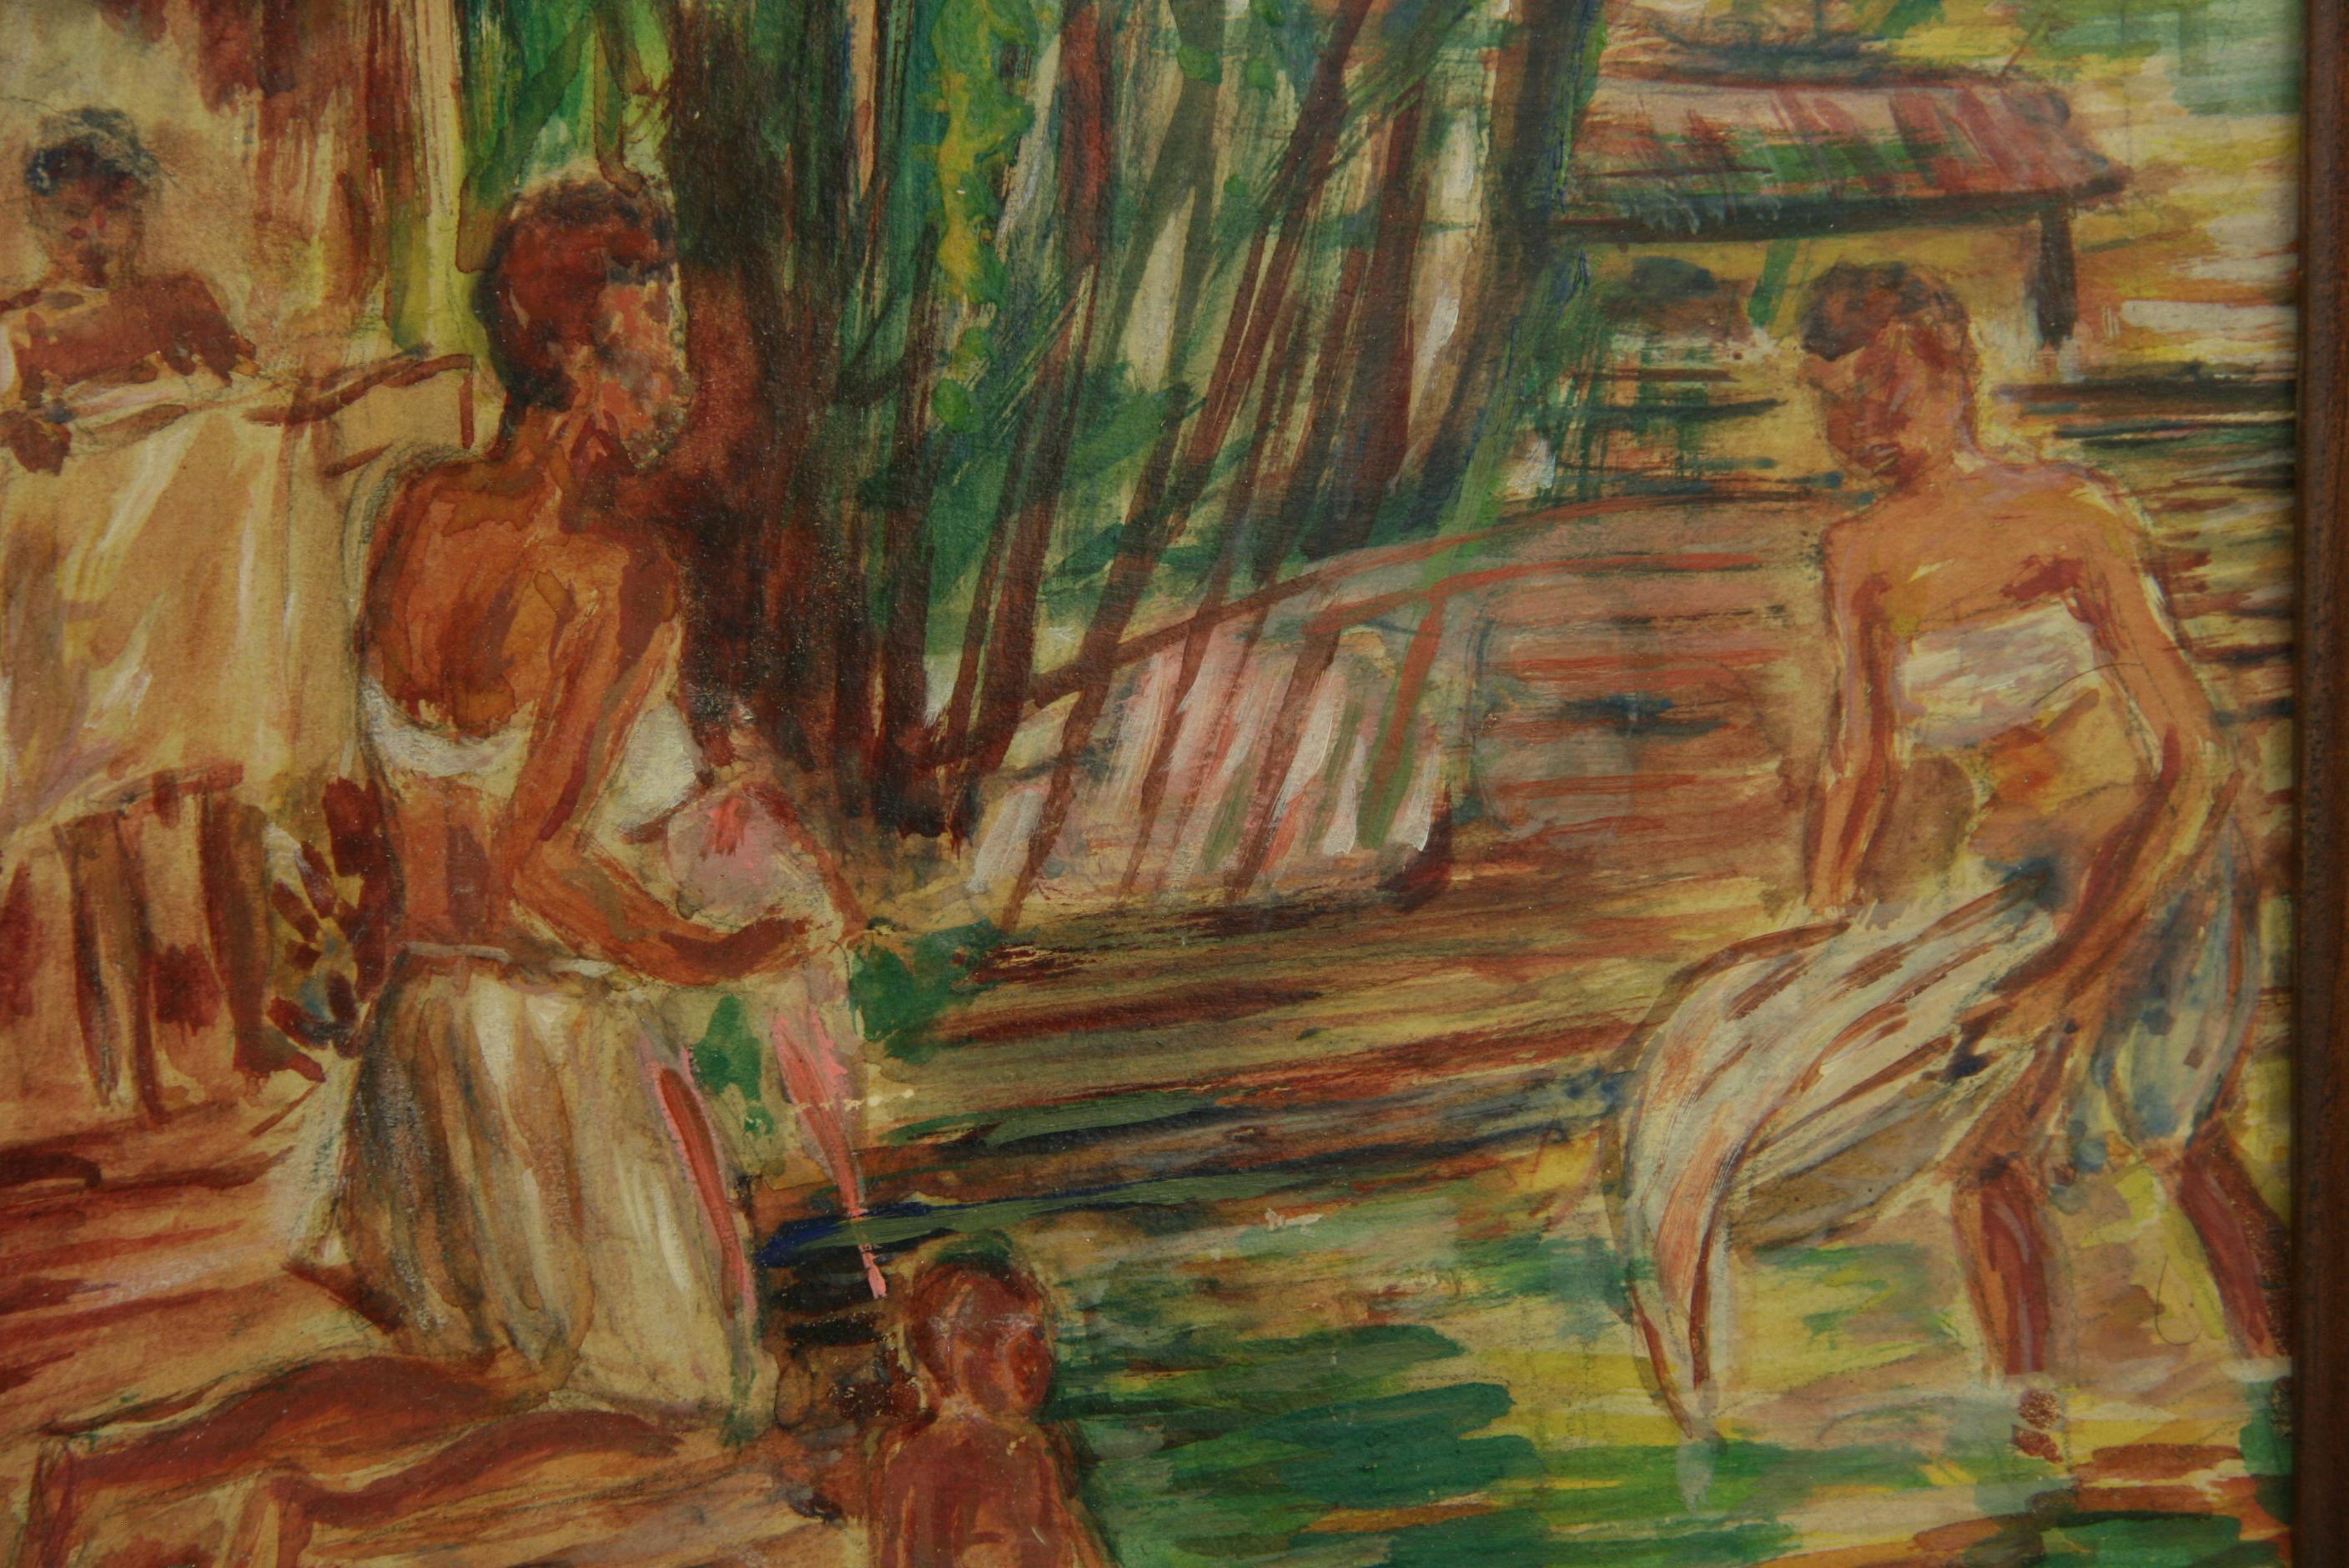 5-3601 Family bathers by the stream
Set in a vintage wood frame
Image size 9.5x7.5